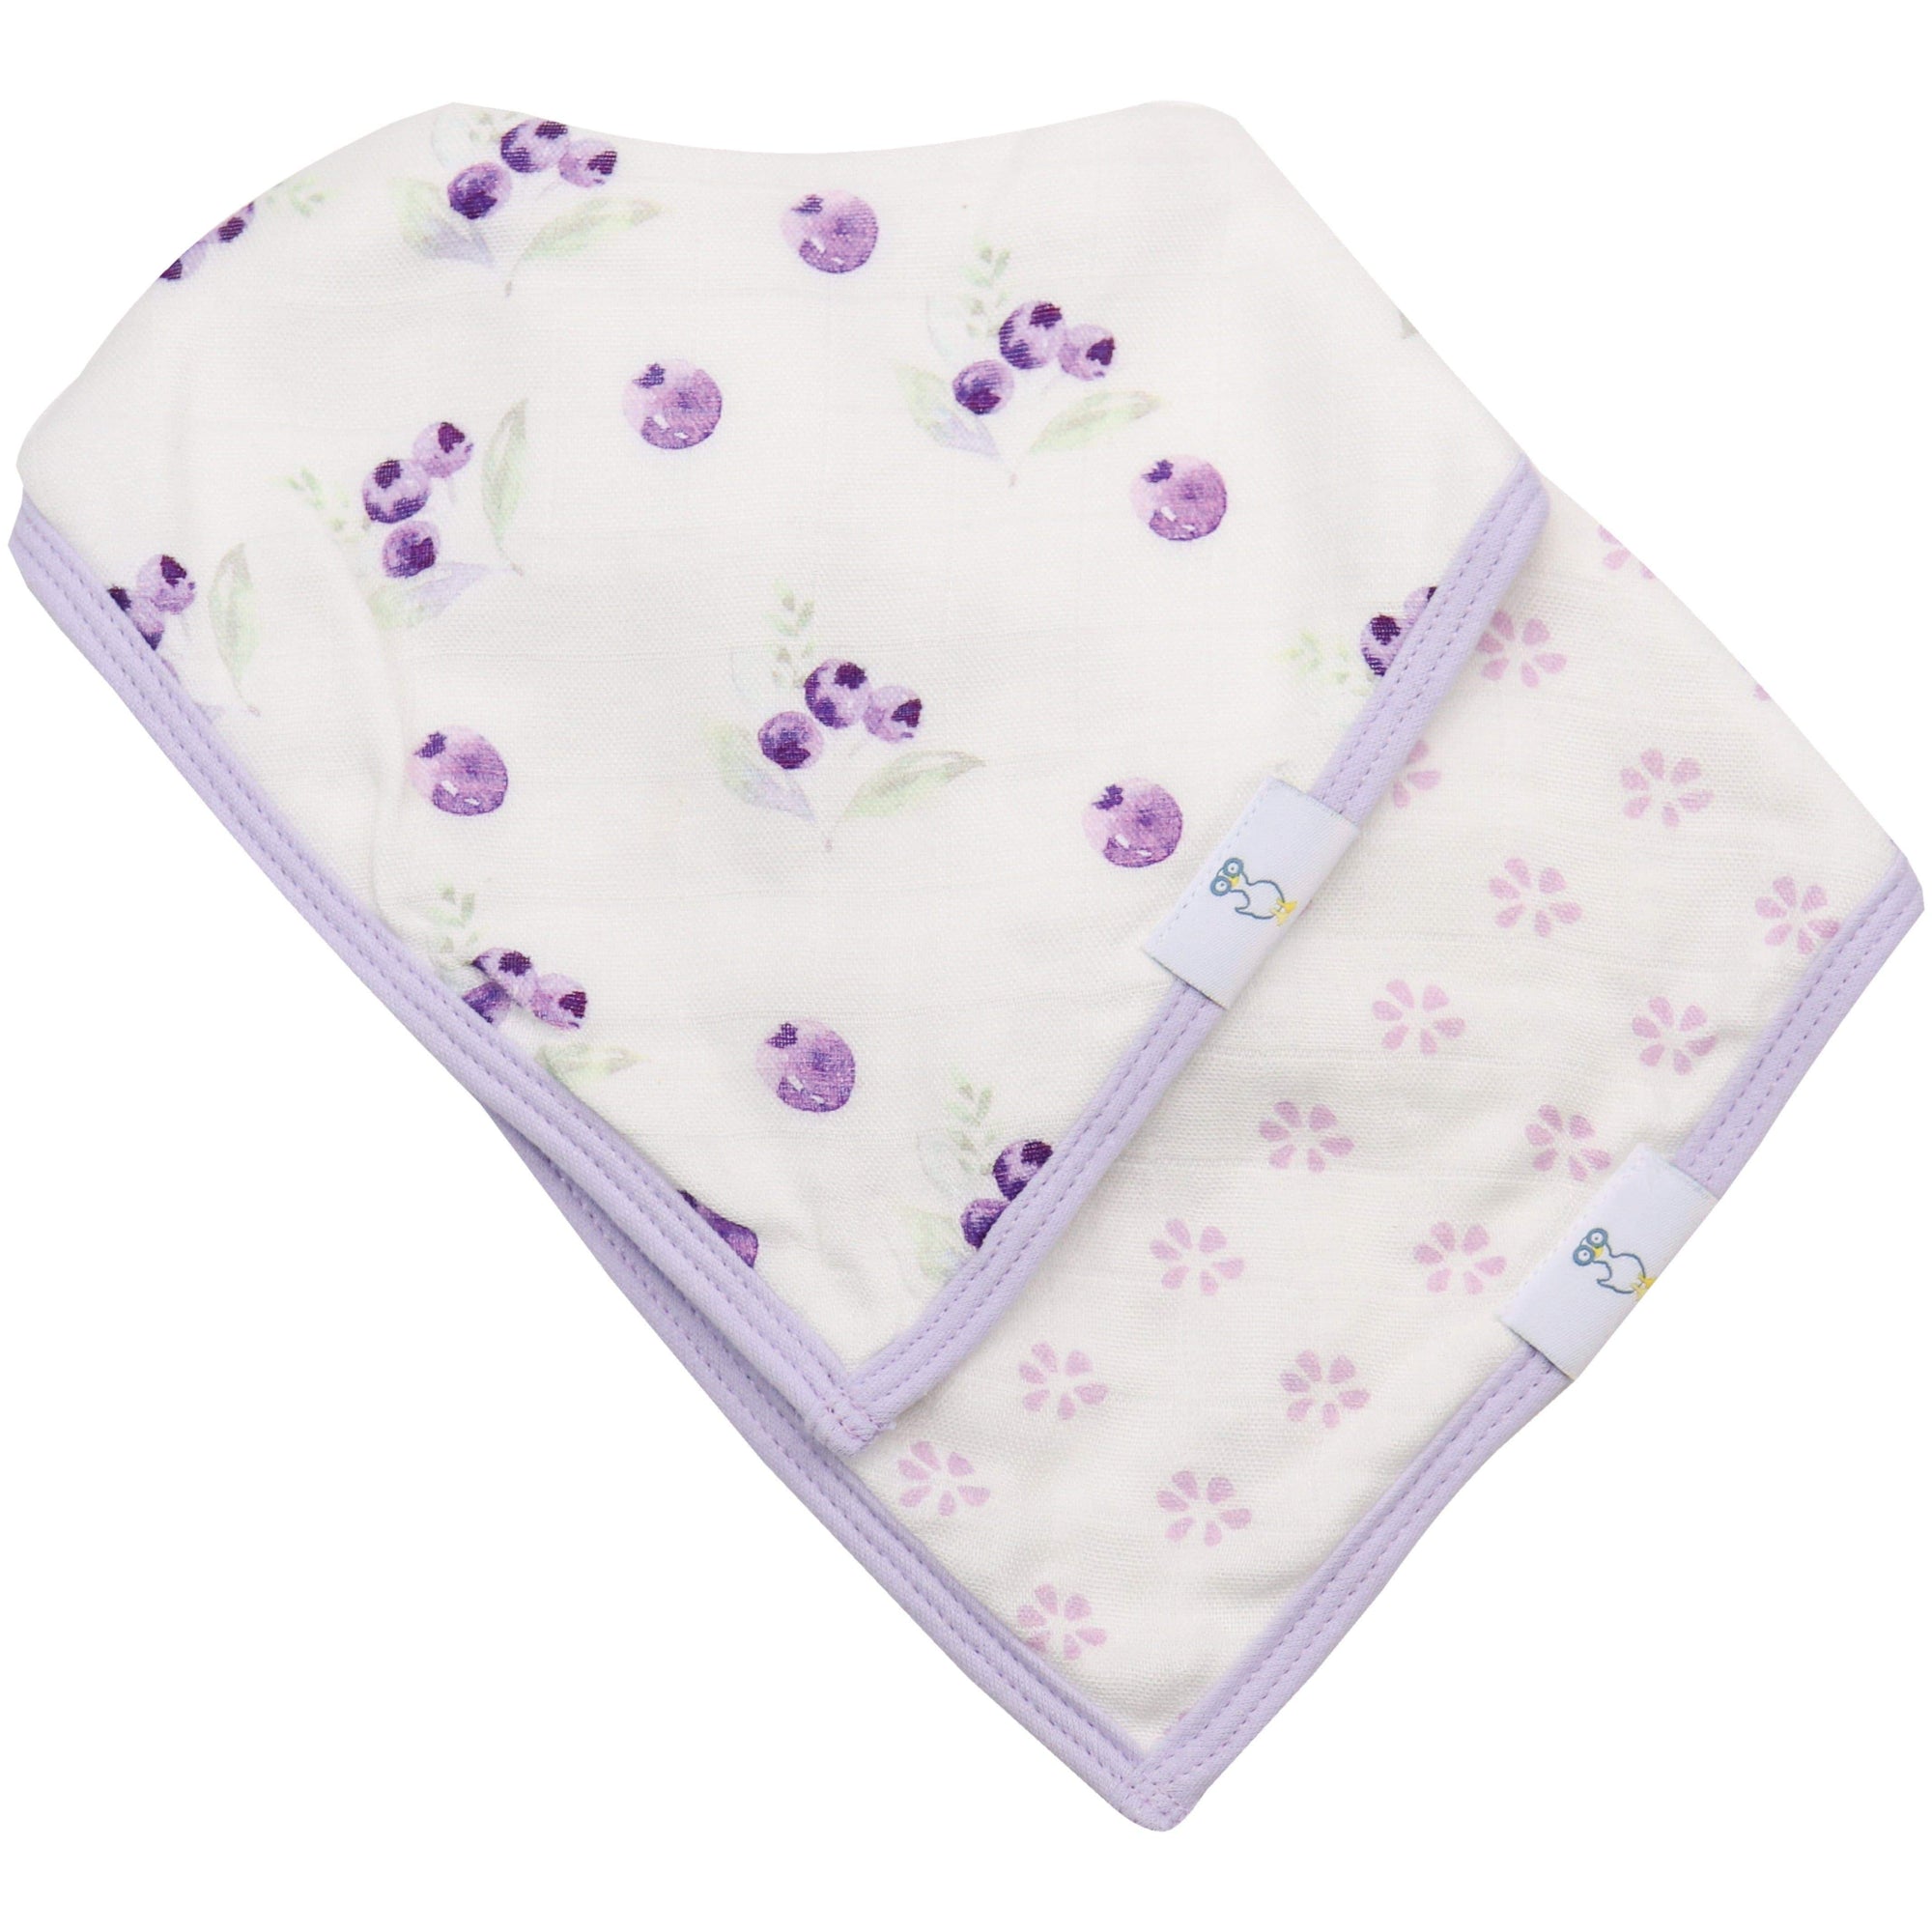 Goosewaddle 2 Pack Muslin & Terry Cloth Bib Set, Blueberries and Flowers